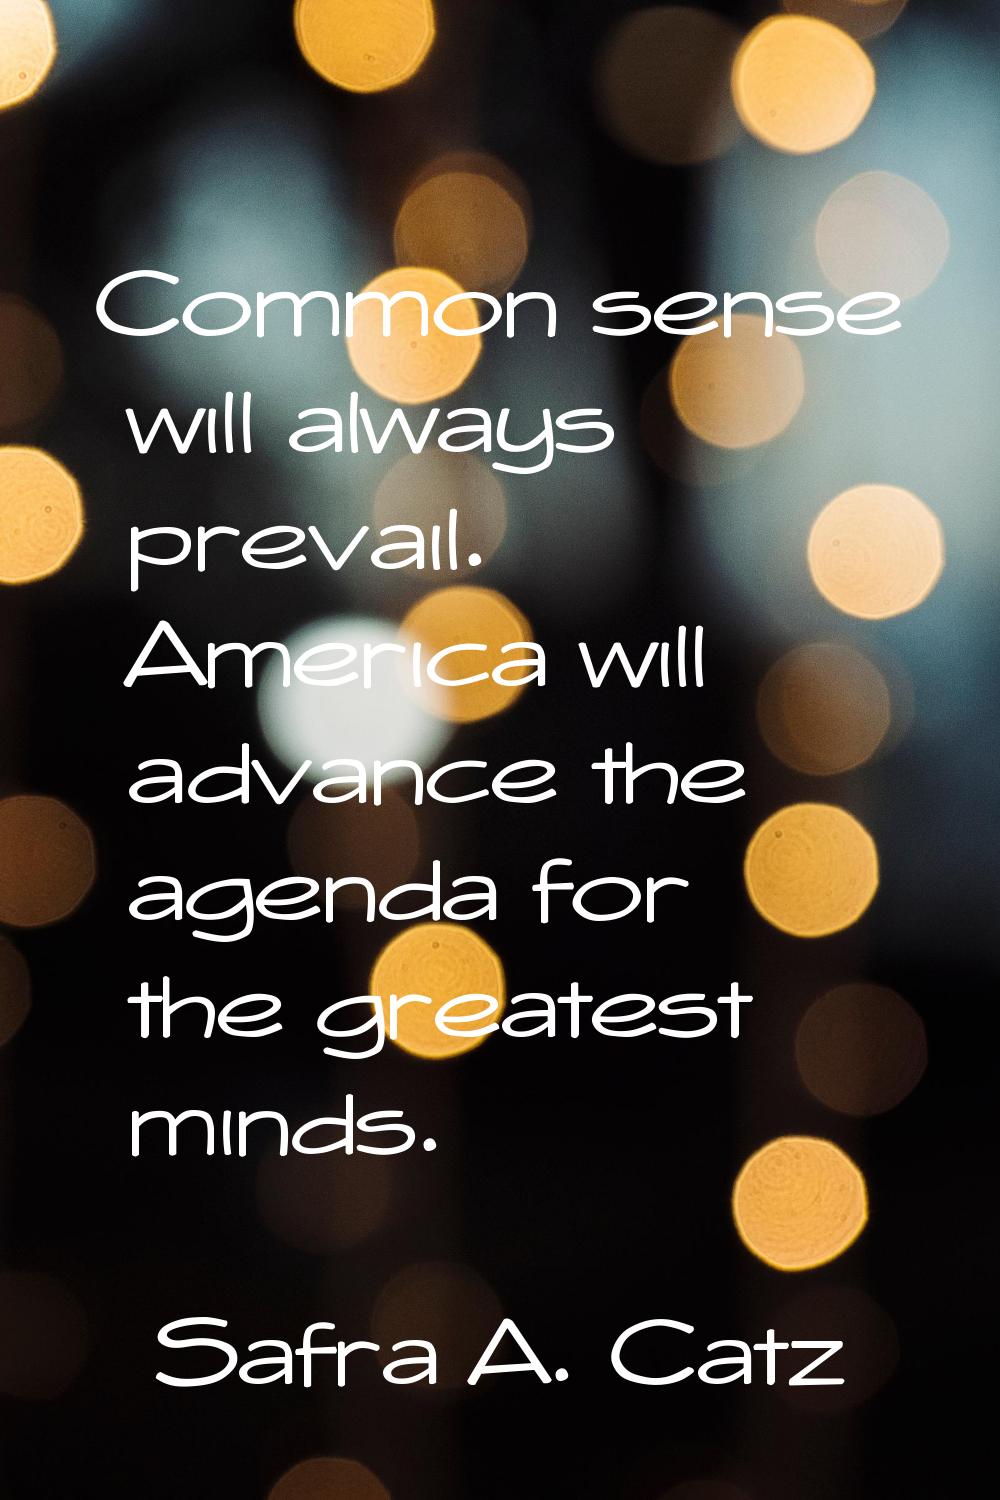 Common sense will always prevail. America will advance the agenda for the greatest minds.